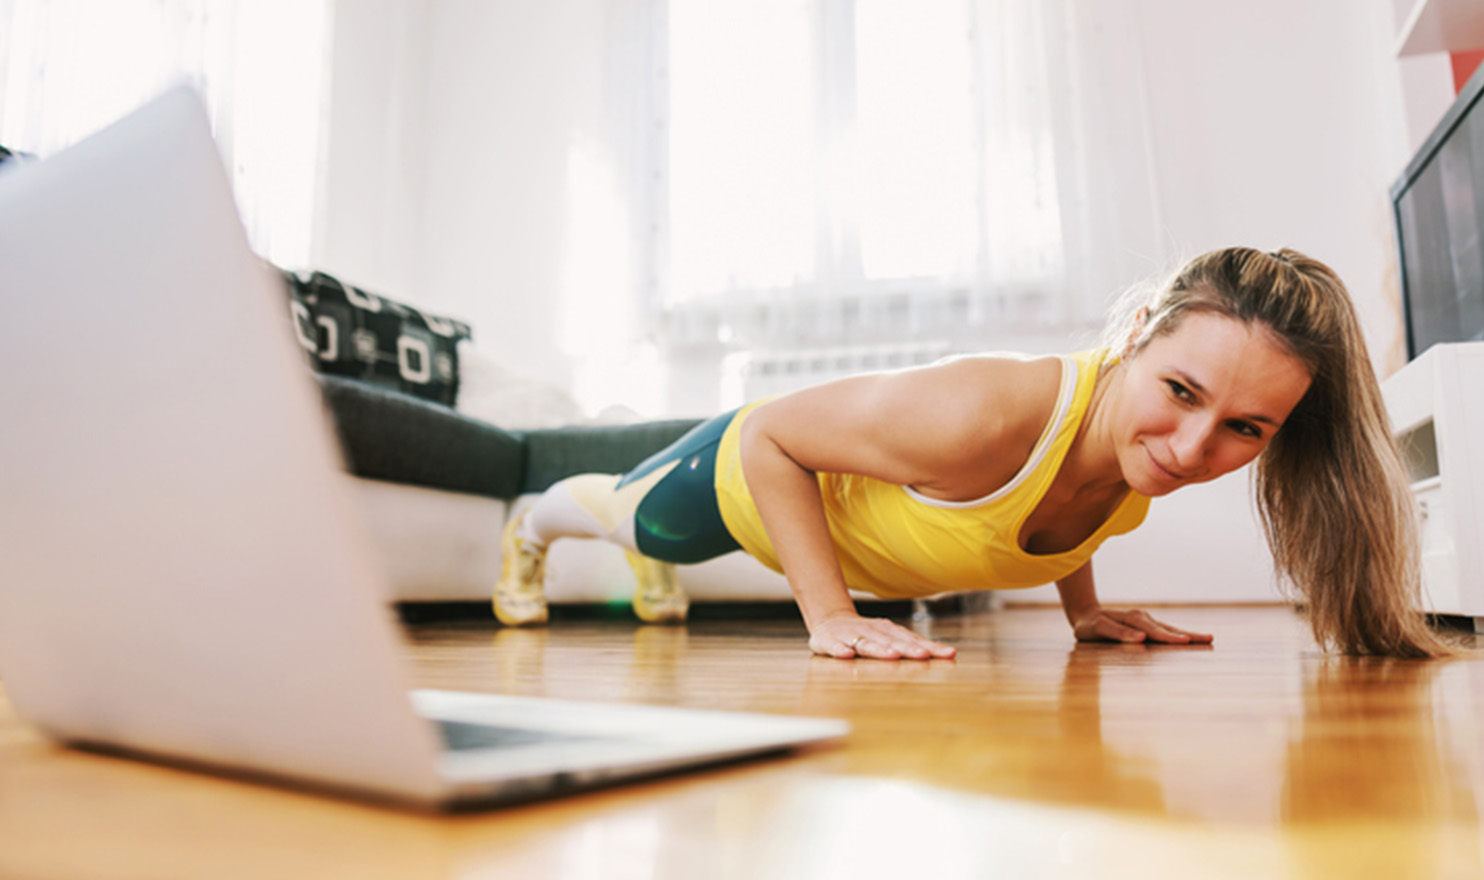 A virtual trainer is demonstrating a plank in front of her computer monitor on the floor of her home as she guides her client in an online workout.